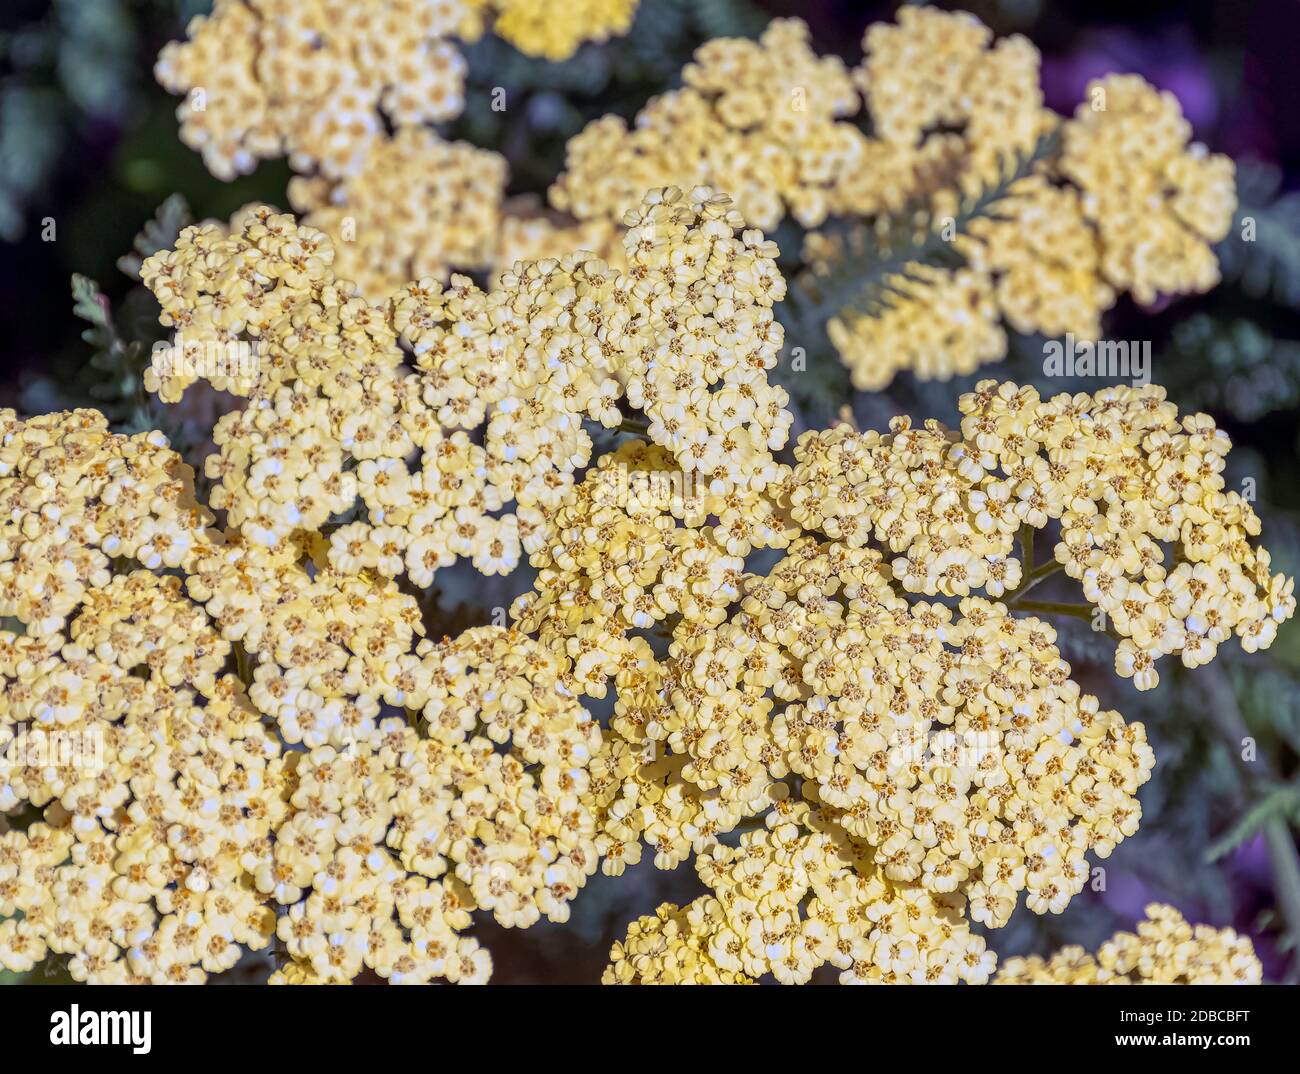 Achillea filipendulina, known as fernleaf yarrow, milfoil or nosebleed - Asian species of flowering plant in the sunflower family Stock Photo